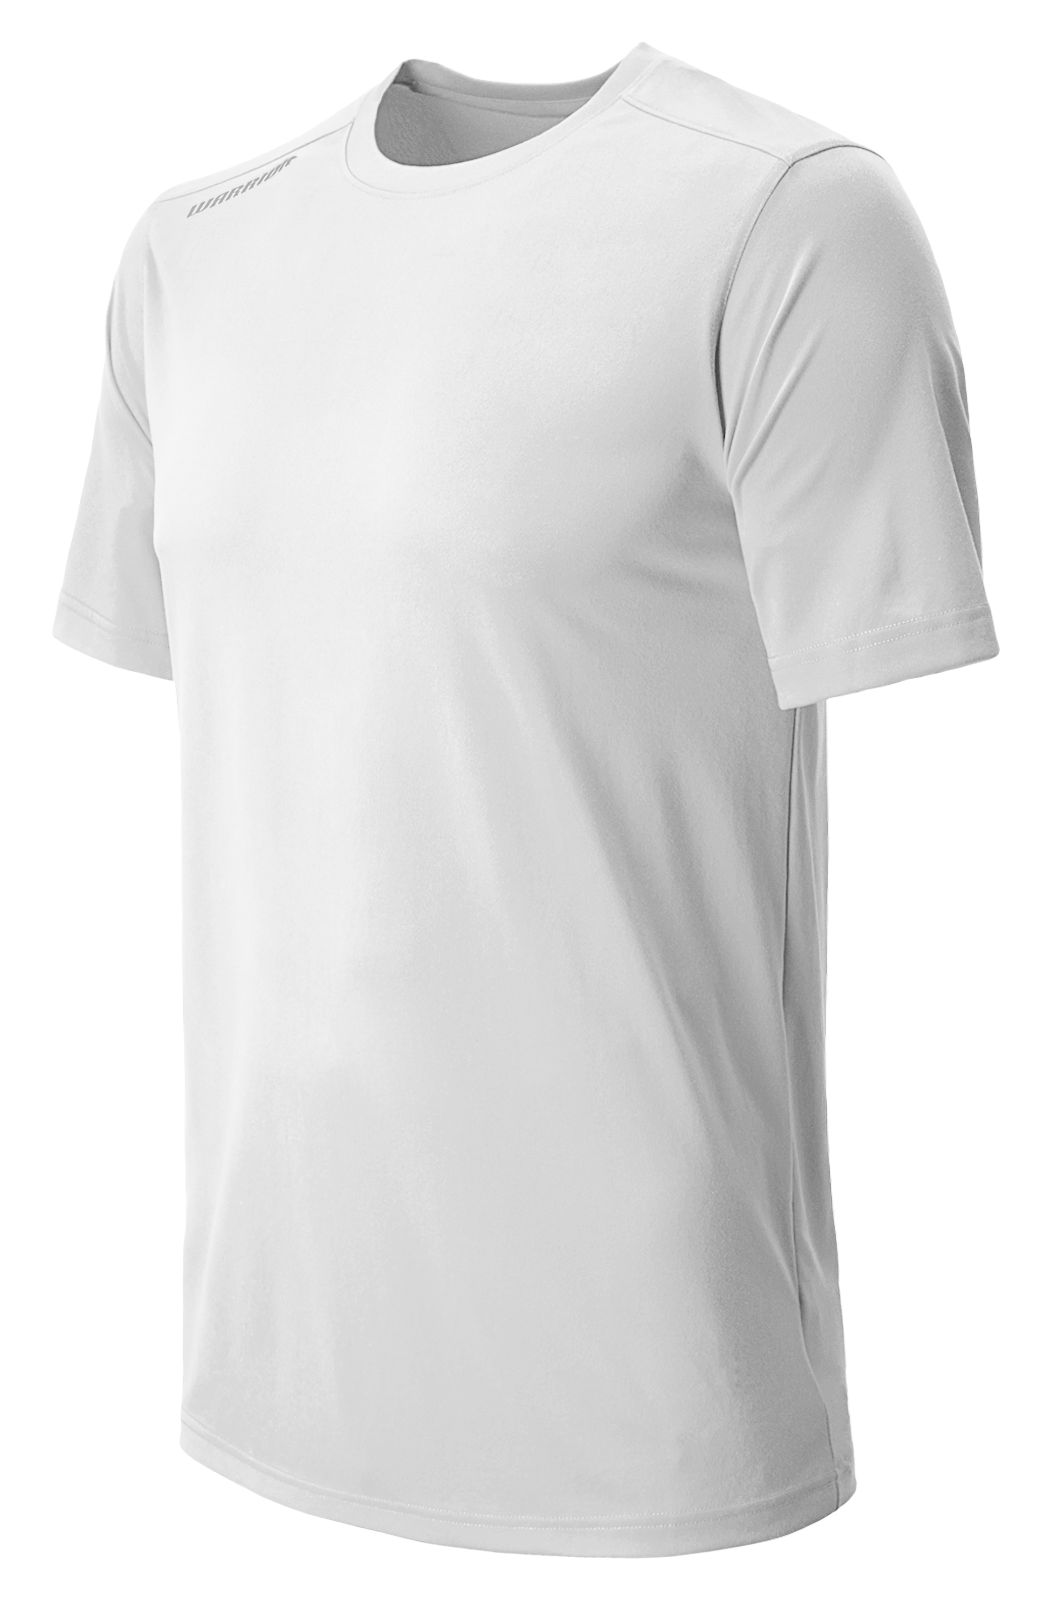 Wartech Tee SS, White image number 1